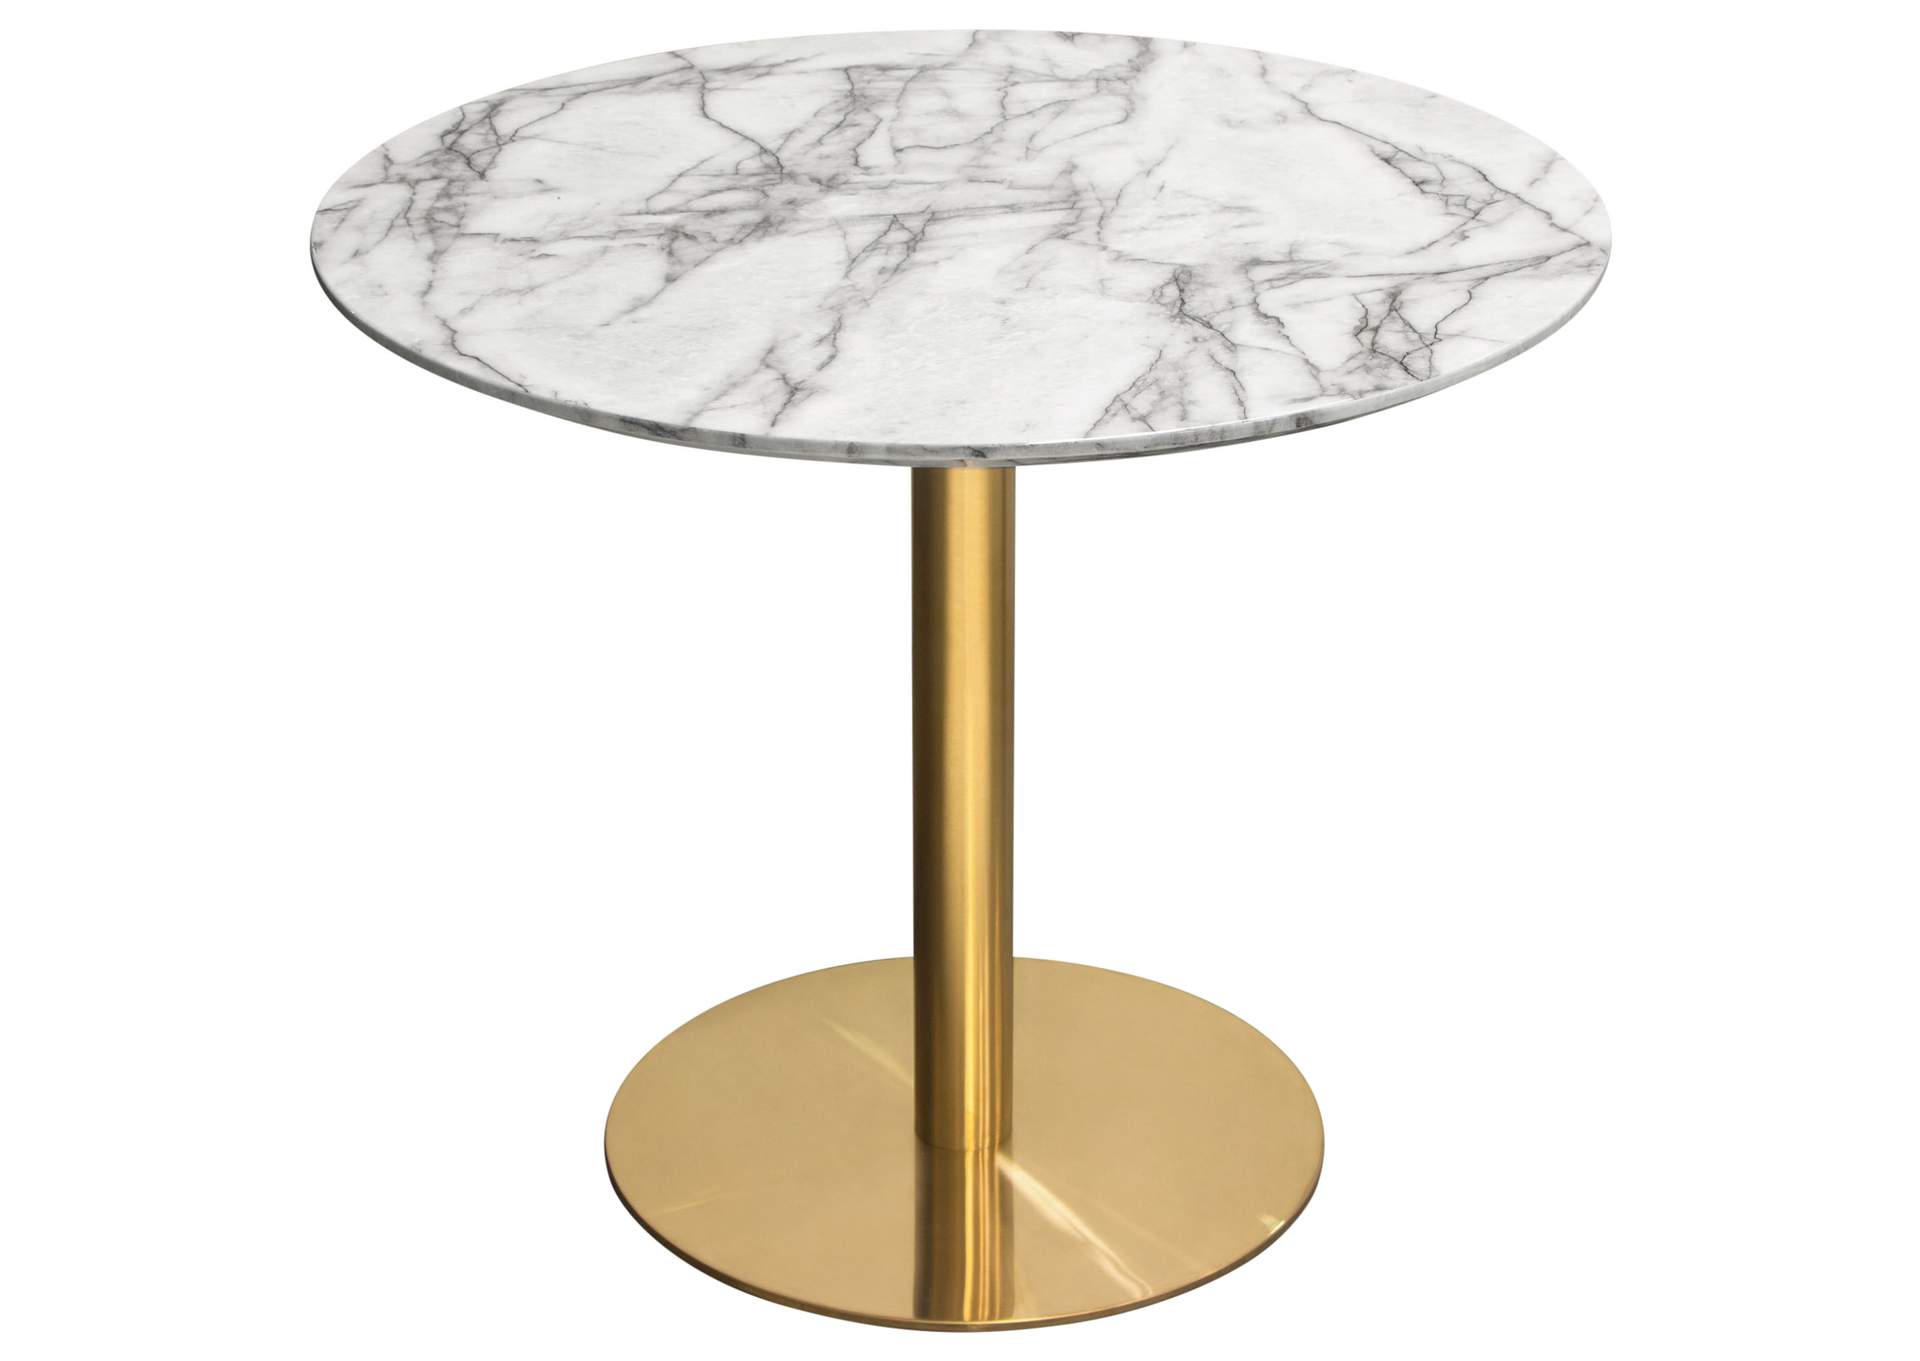 Stella 36" Round Dining Table w/ Faux Marble Top and Brushed Gold Metal Base by Diamond Sofa,Diamond Sofa